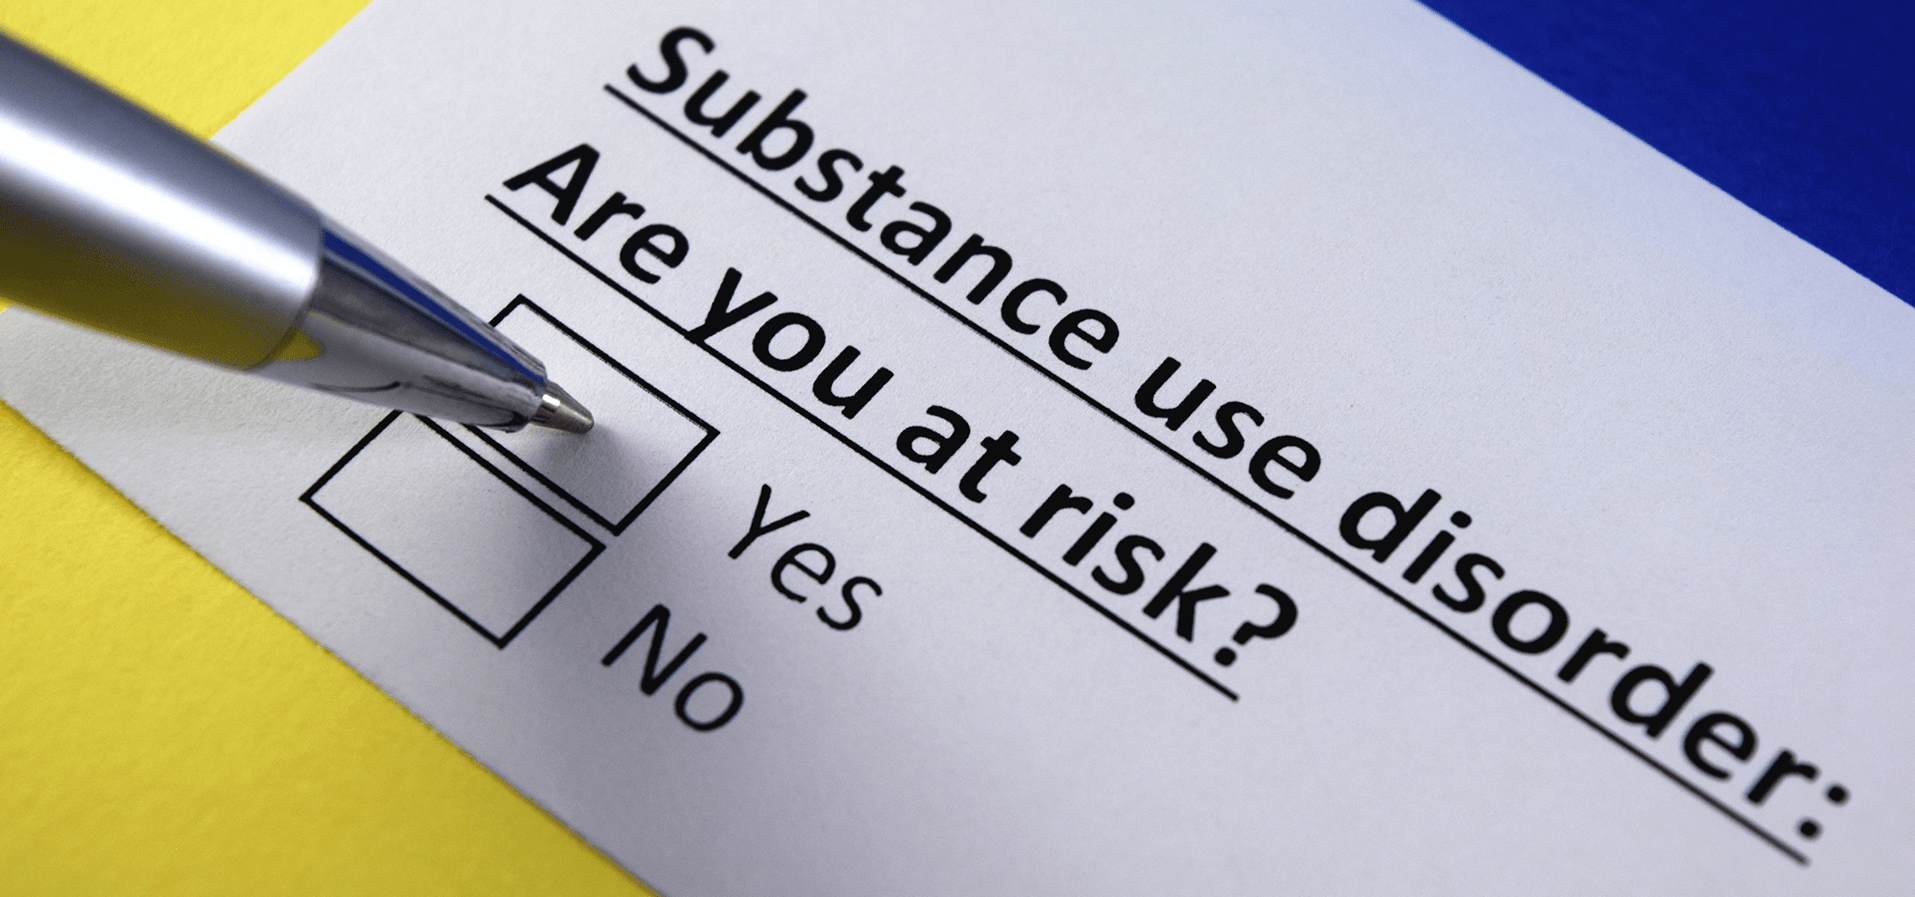 a questionnaire about substance use disorder makes people think about experimenting vs addiction